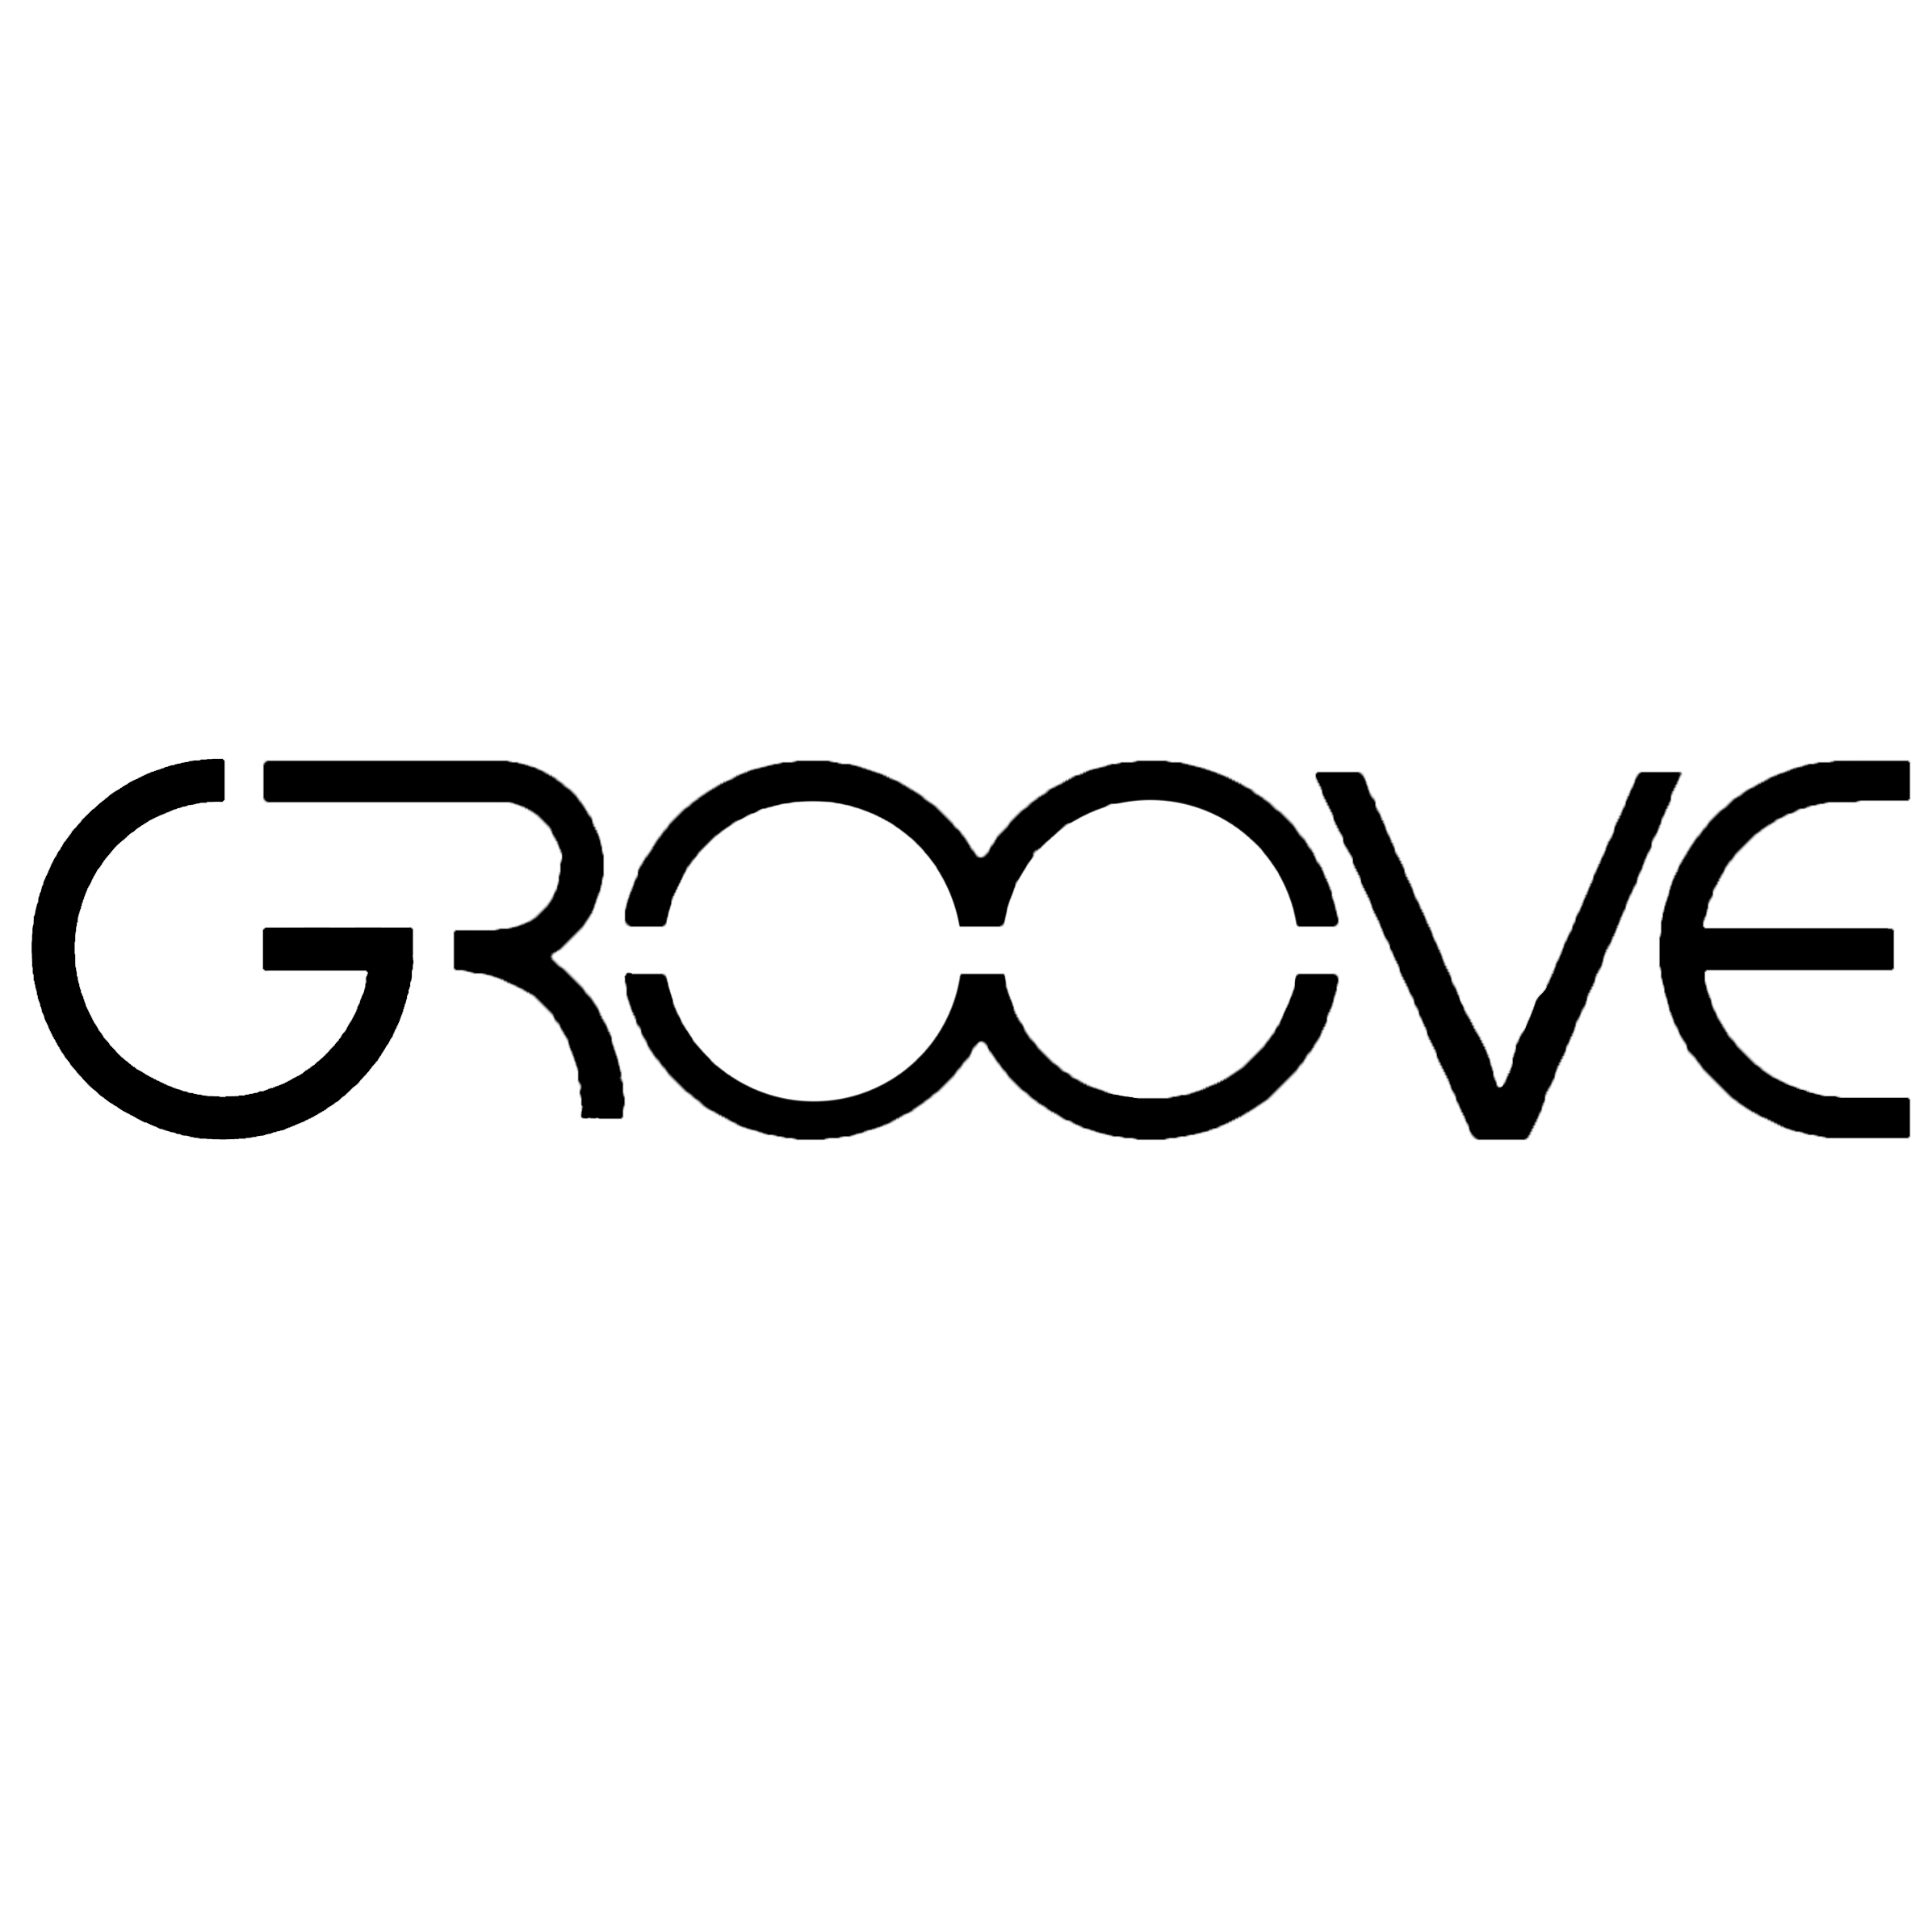 Groove provide you great quality vaporizers at a value price